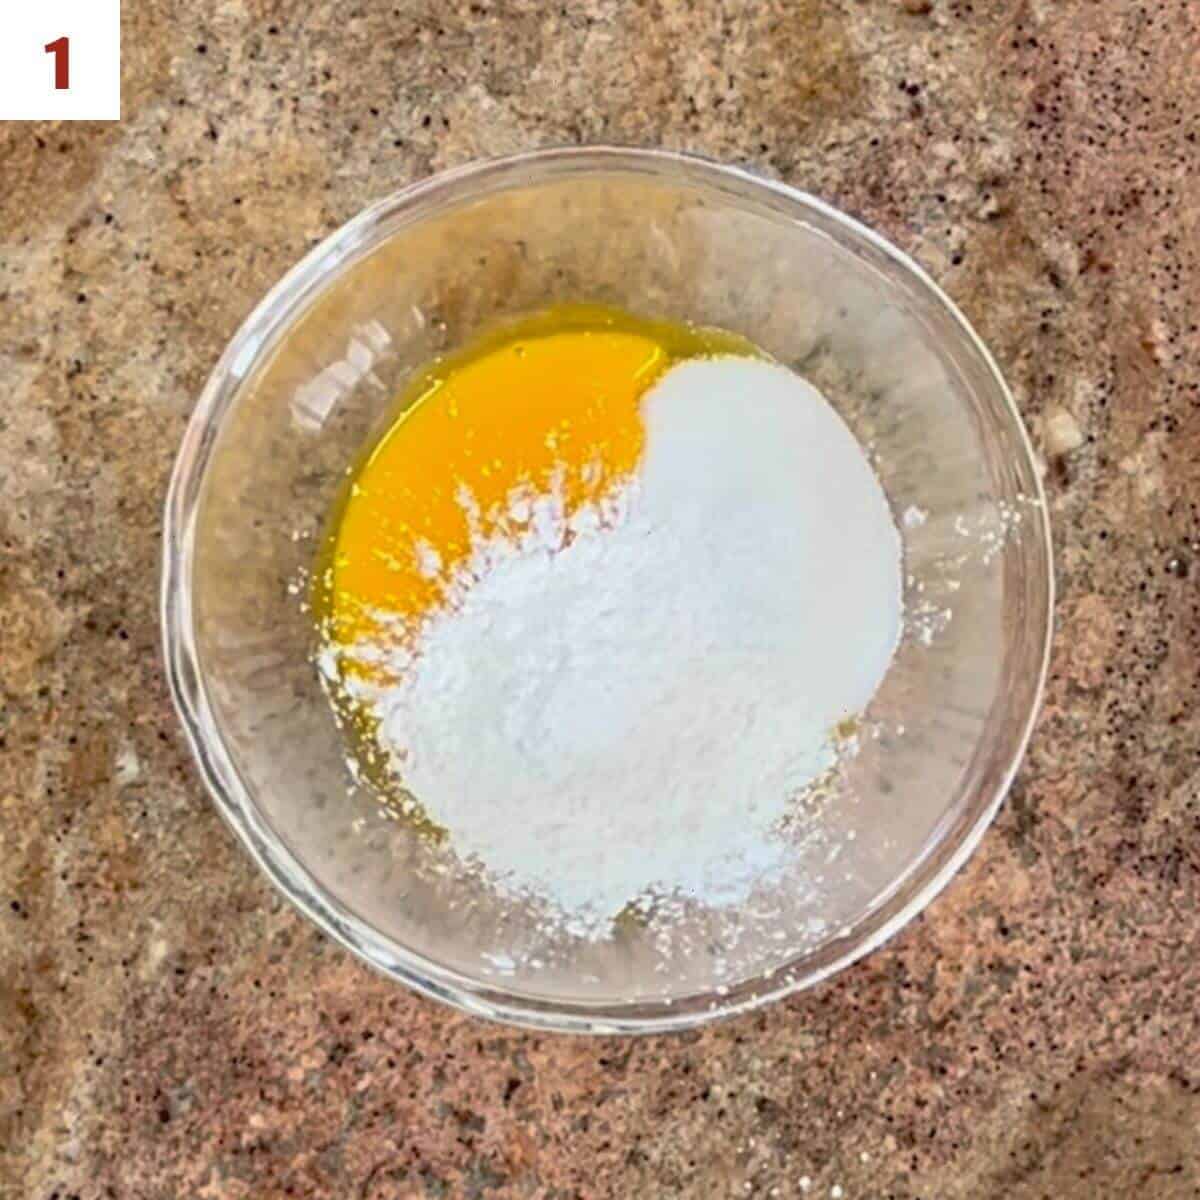 Egg yolks, sugar, and cornstarch in a glass bowl from overhead.